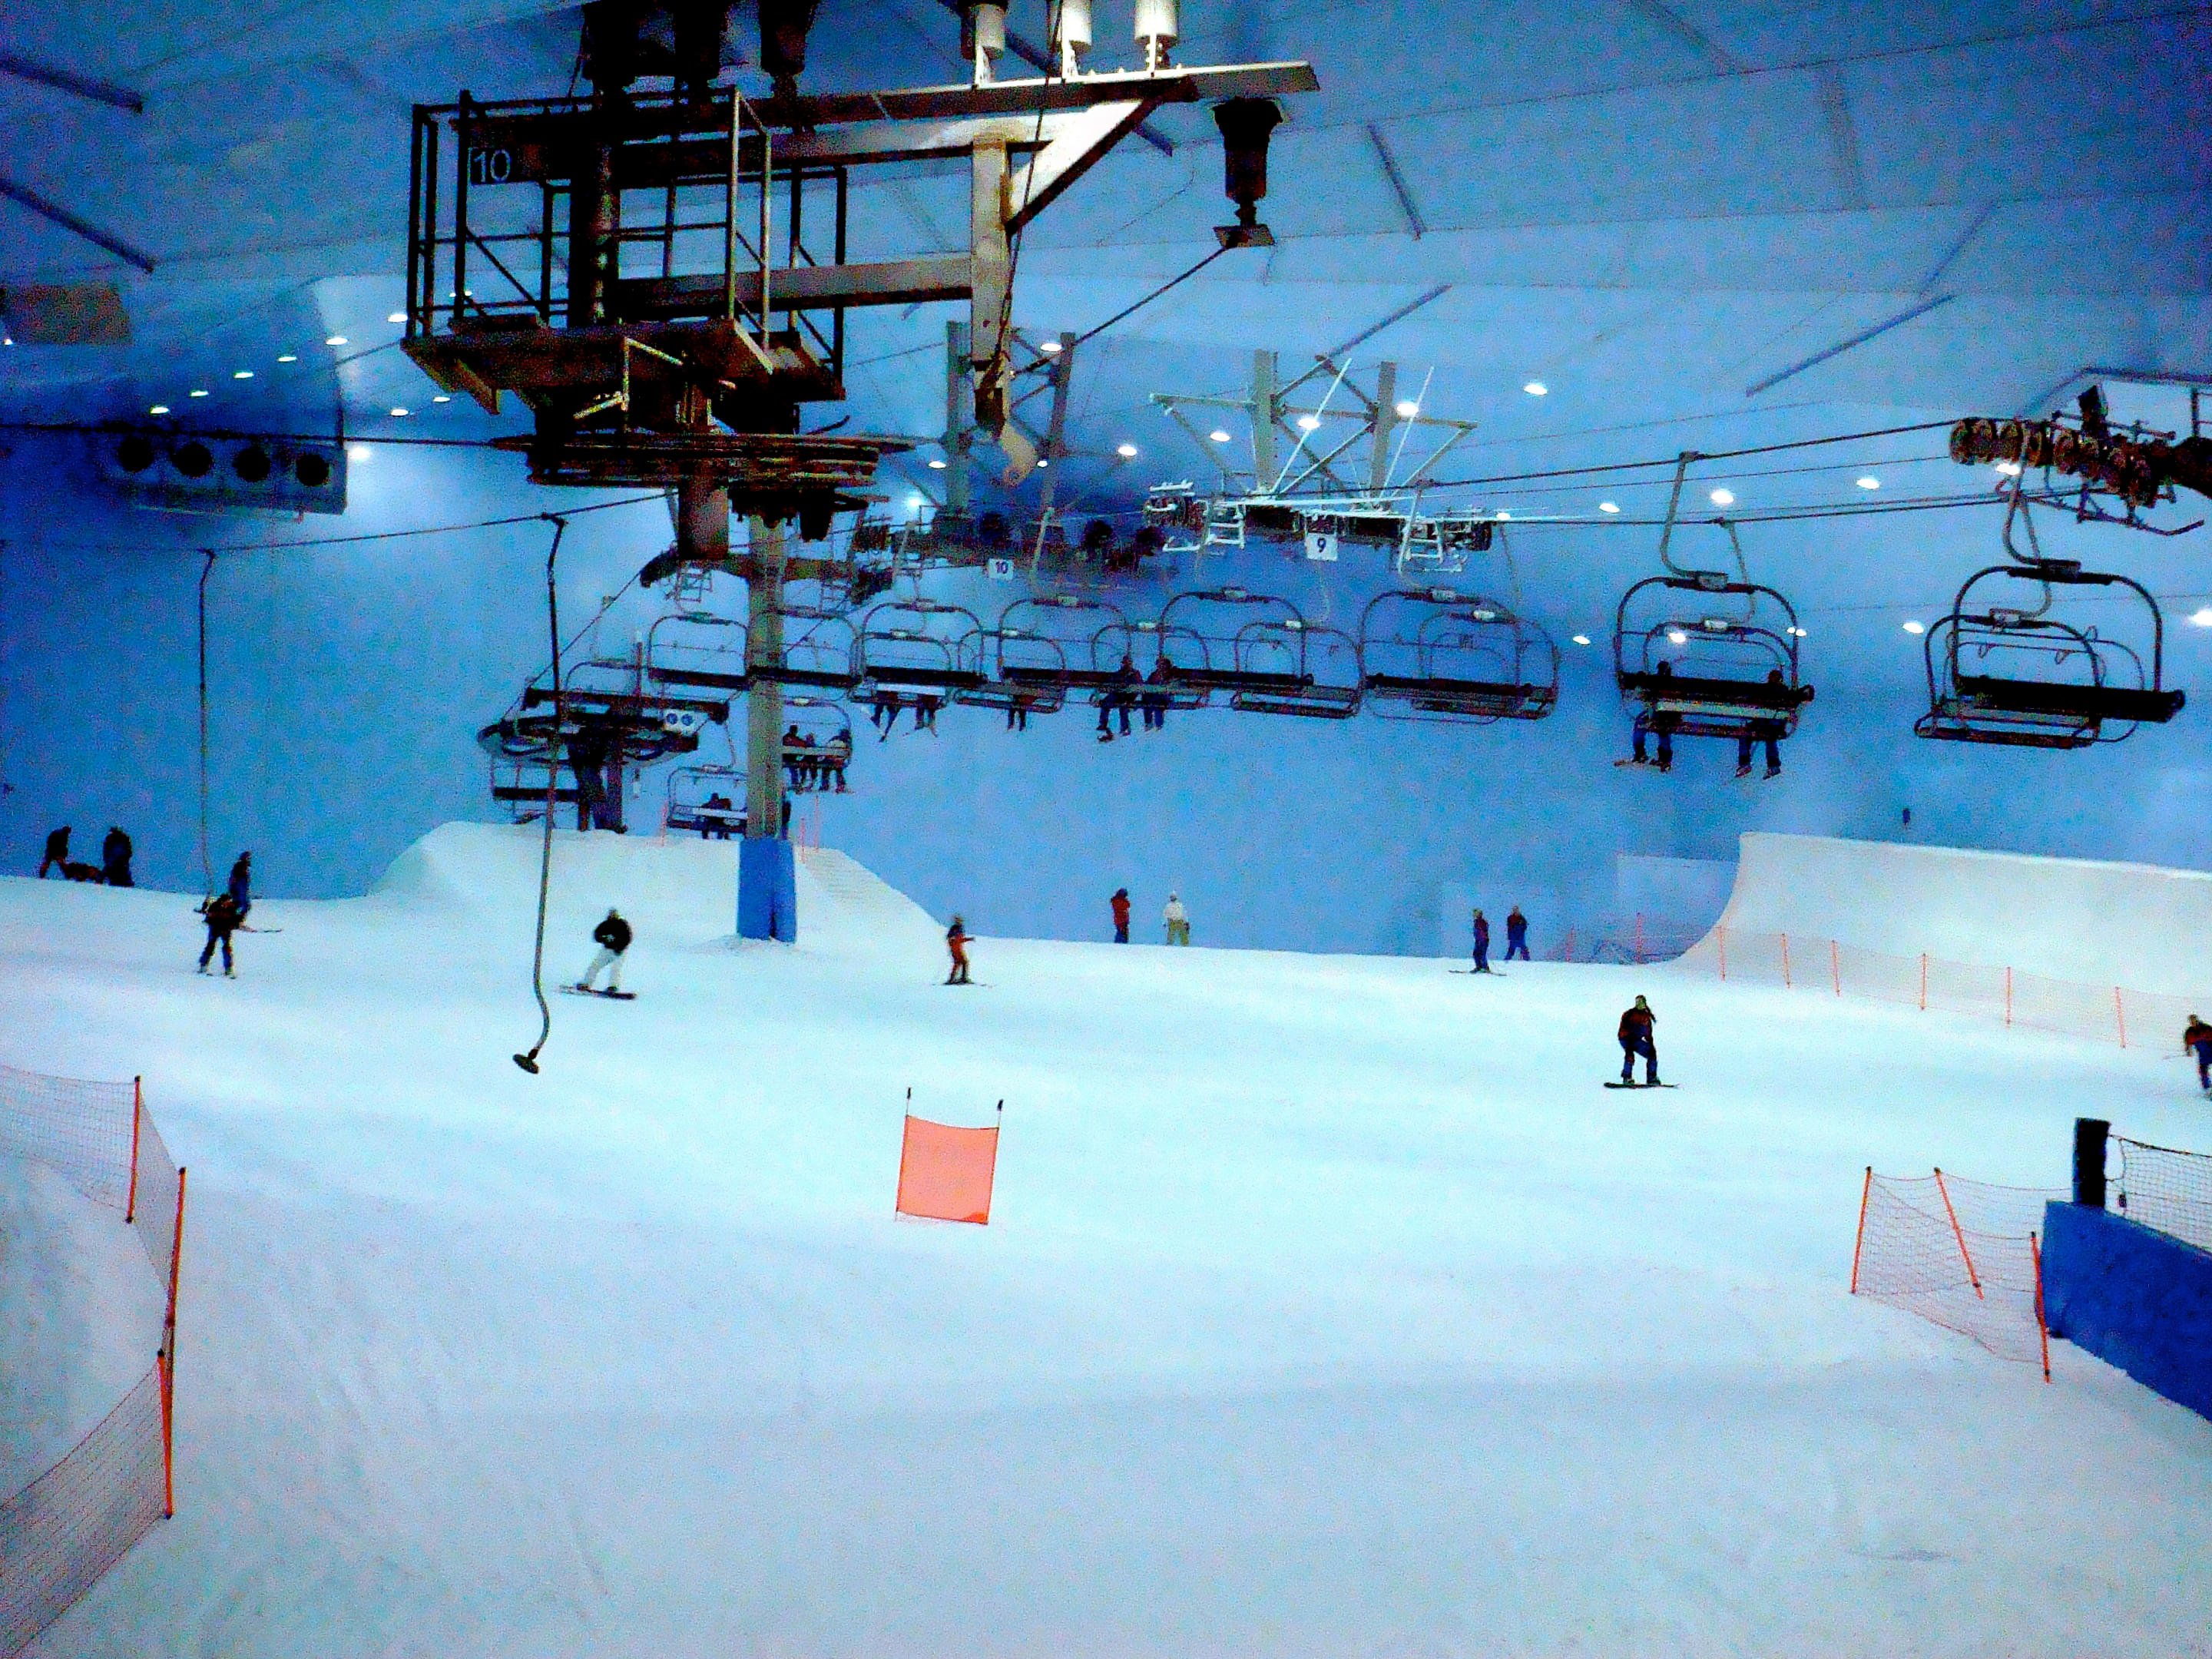 Snow Slopes In Dubai Overview